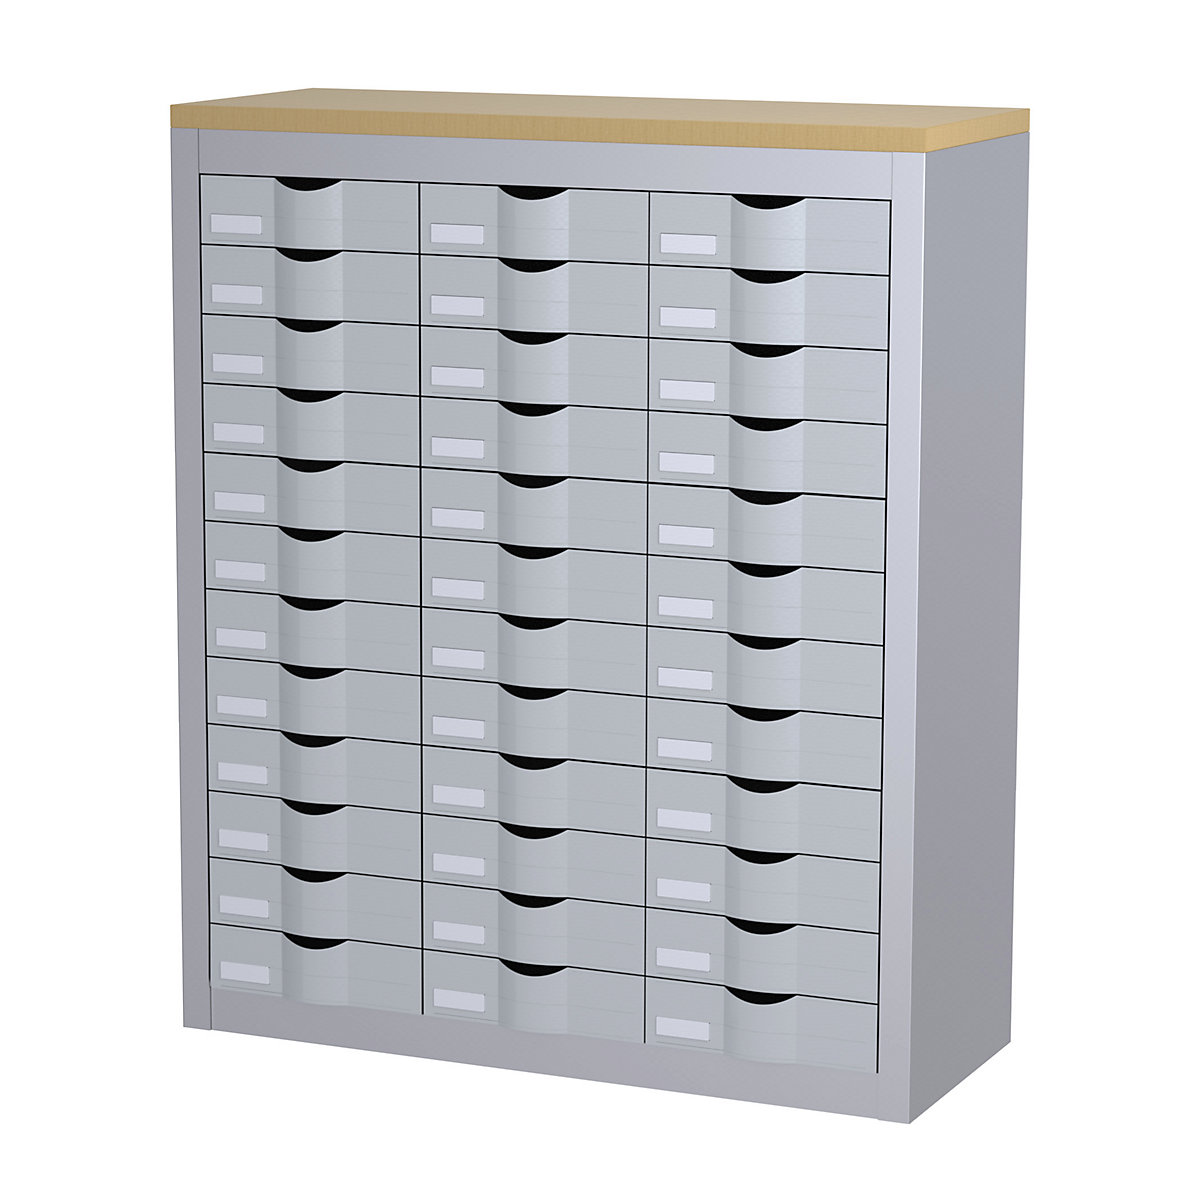 Sorting station, with drawers, 3 rows, 36 drawers, aluminium-8